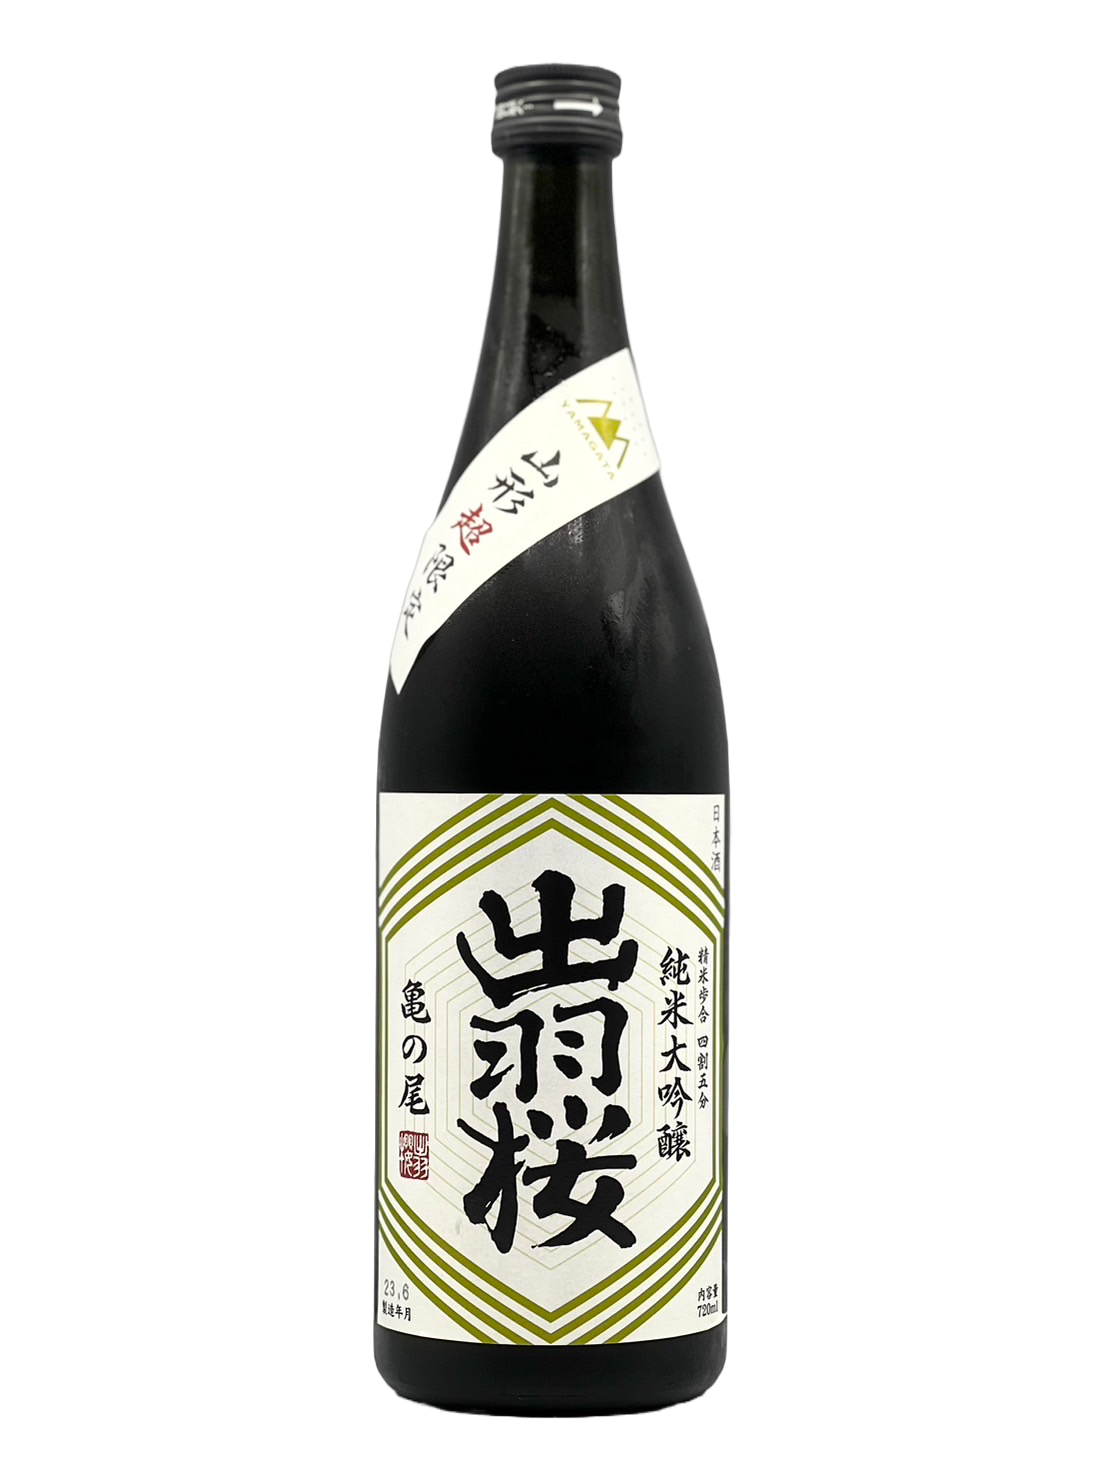 Dewa cherry tree pure rice size brewing sake from the finest rice Yamagata super-limited turtle tail